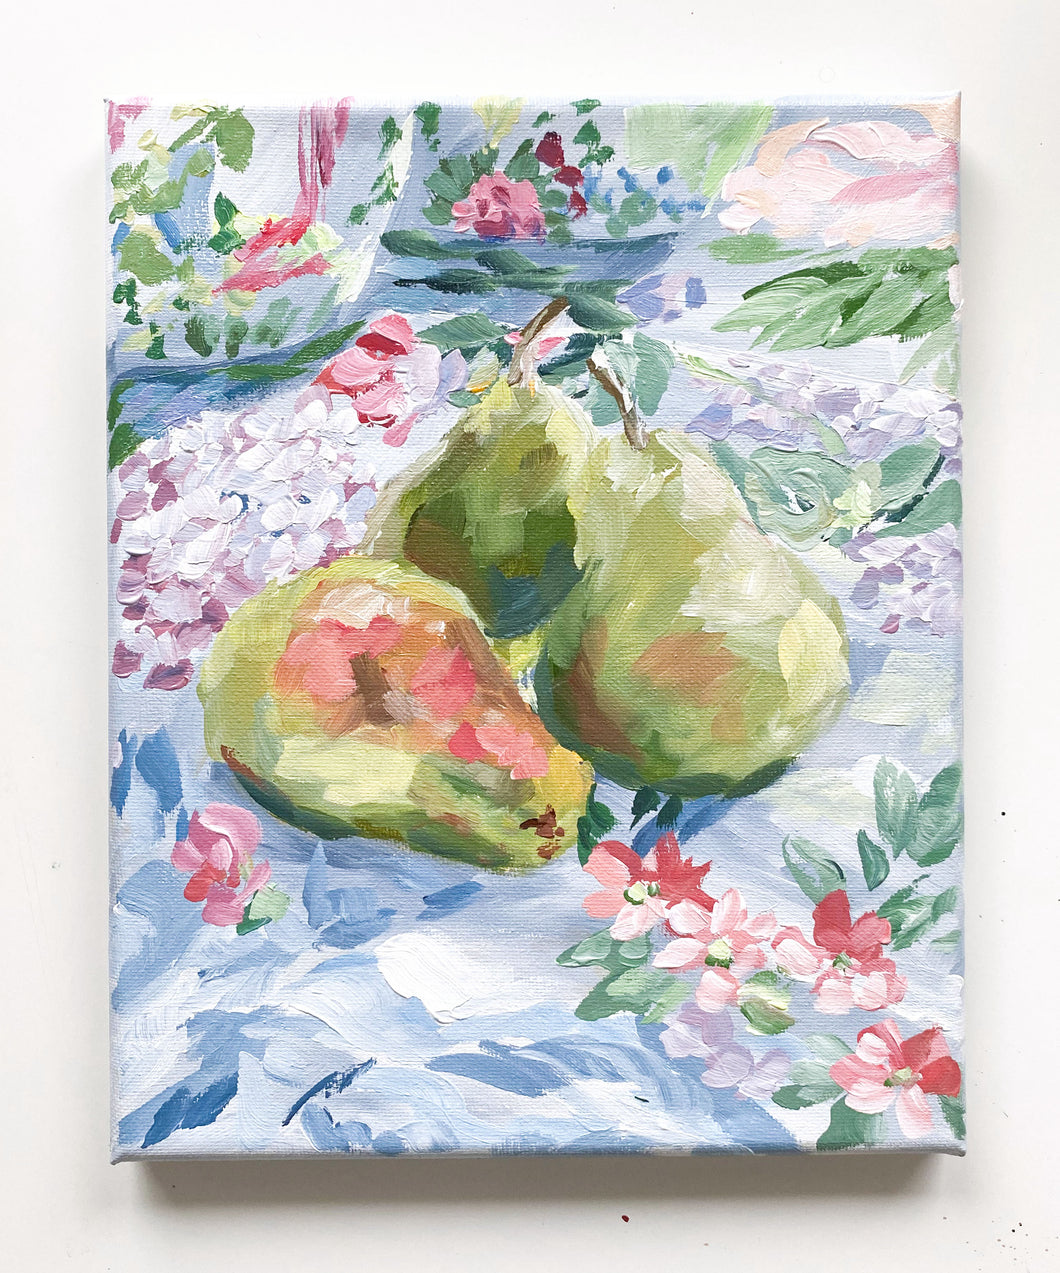 Still life painting of pears on floral fabric - 8 x 10